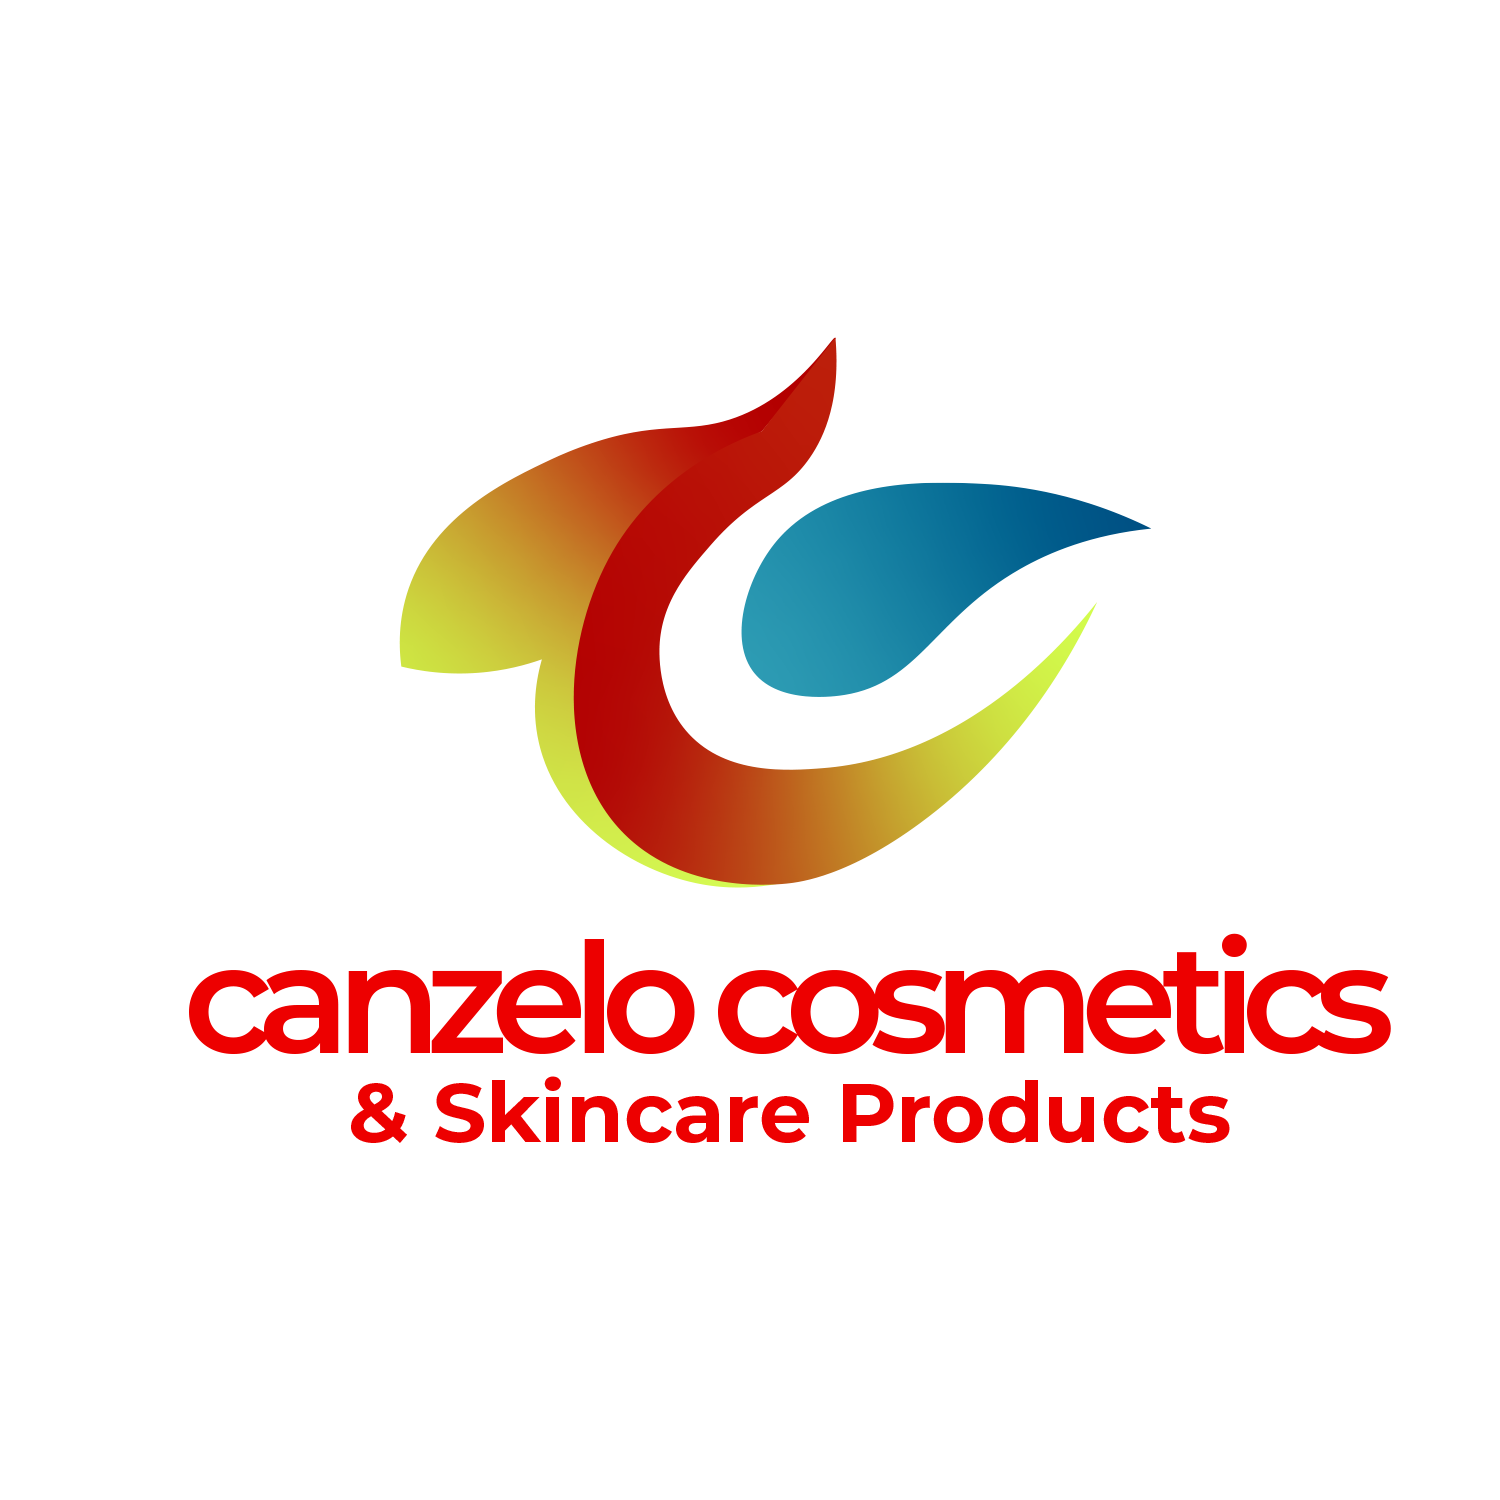 Canzelo Cosmetics and Skin Care Products